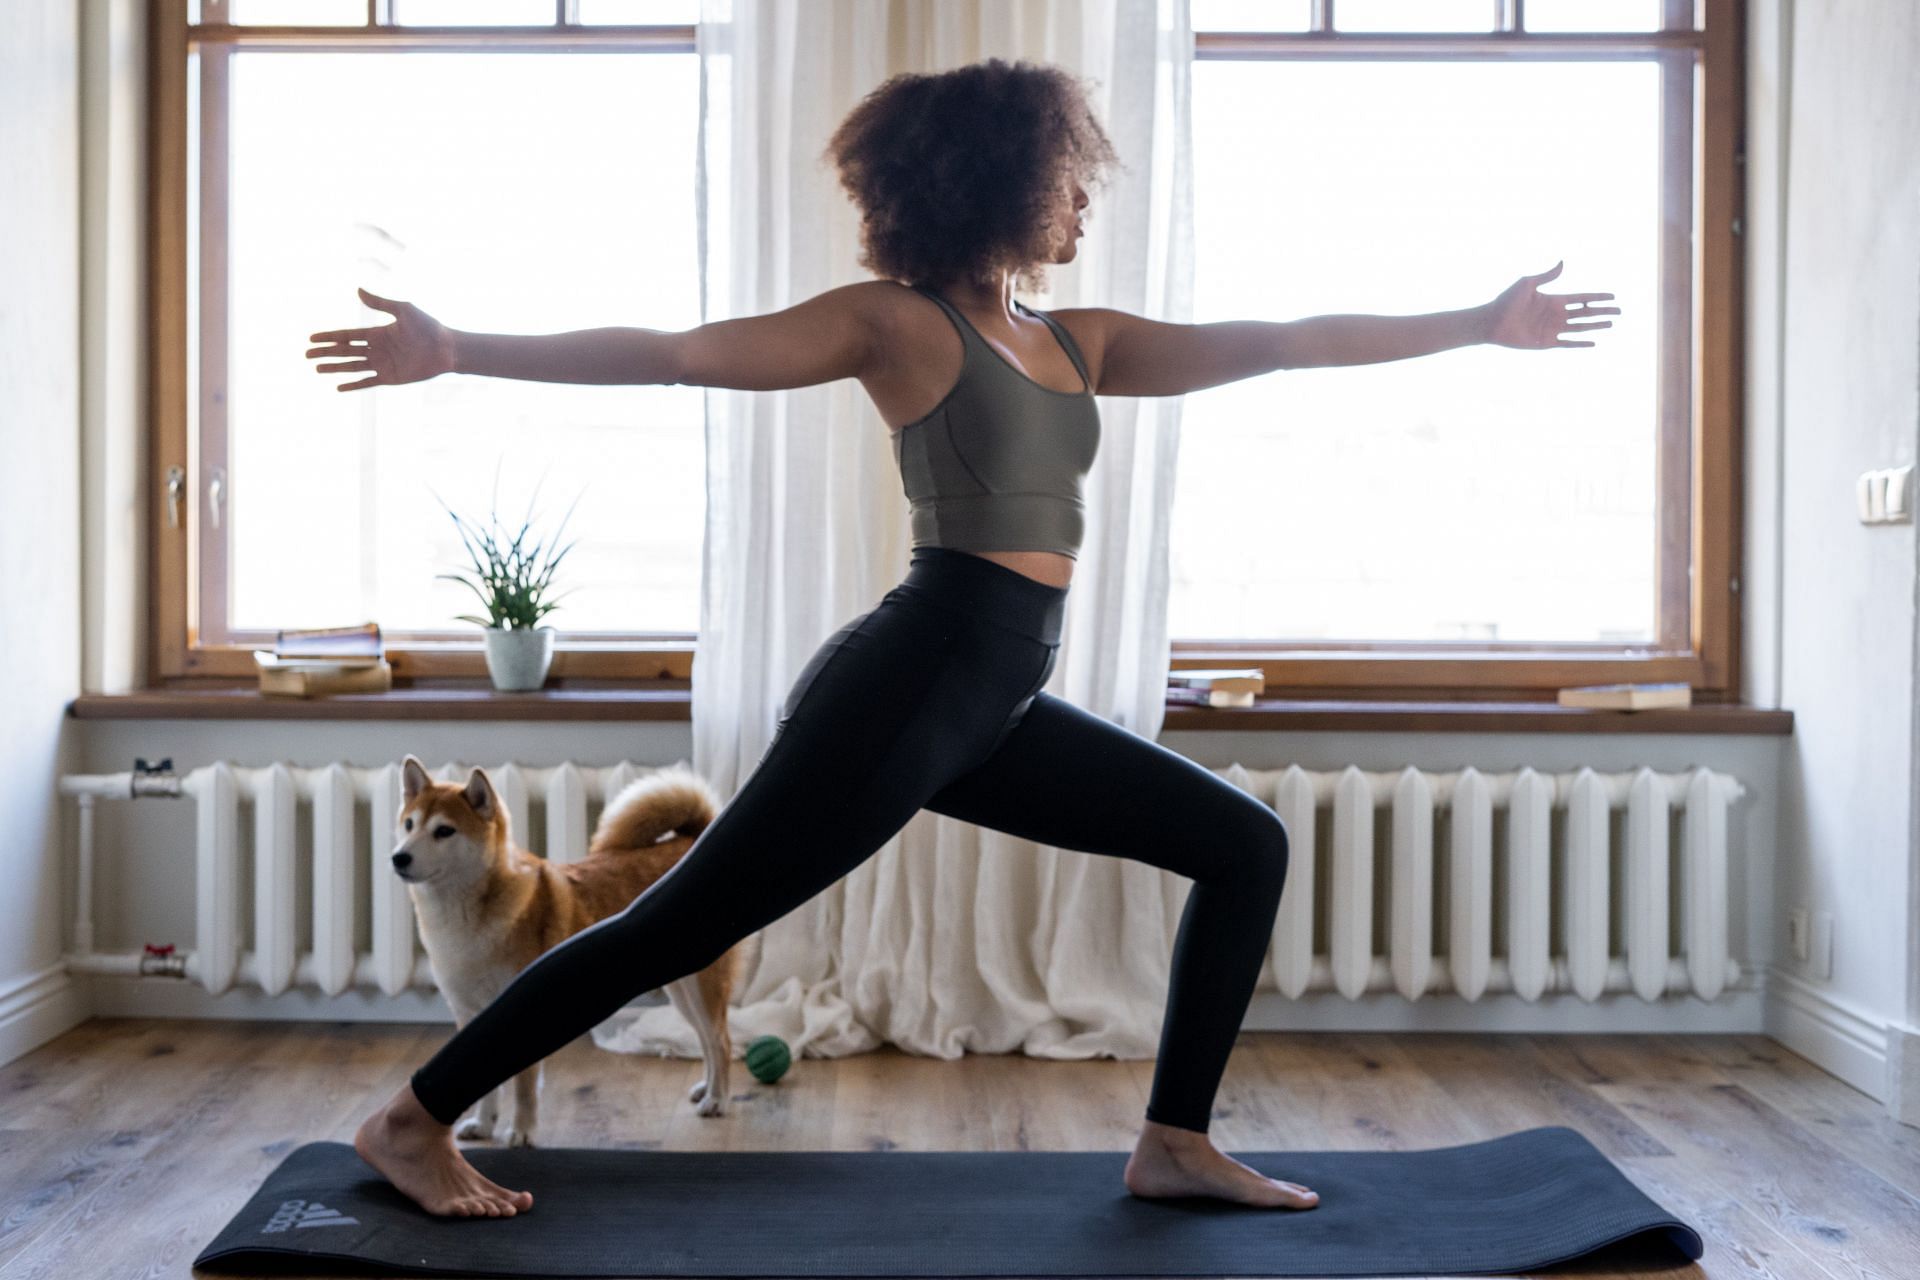 Want to work on your solar plexus? Try these five simple poses. (Image via Pexels / Cottonbro)